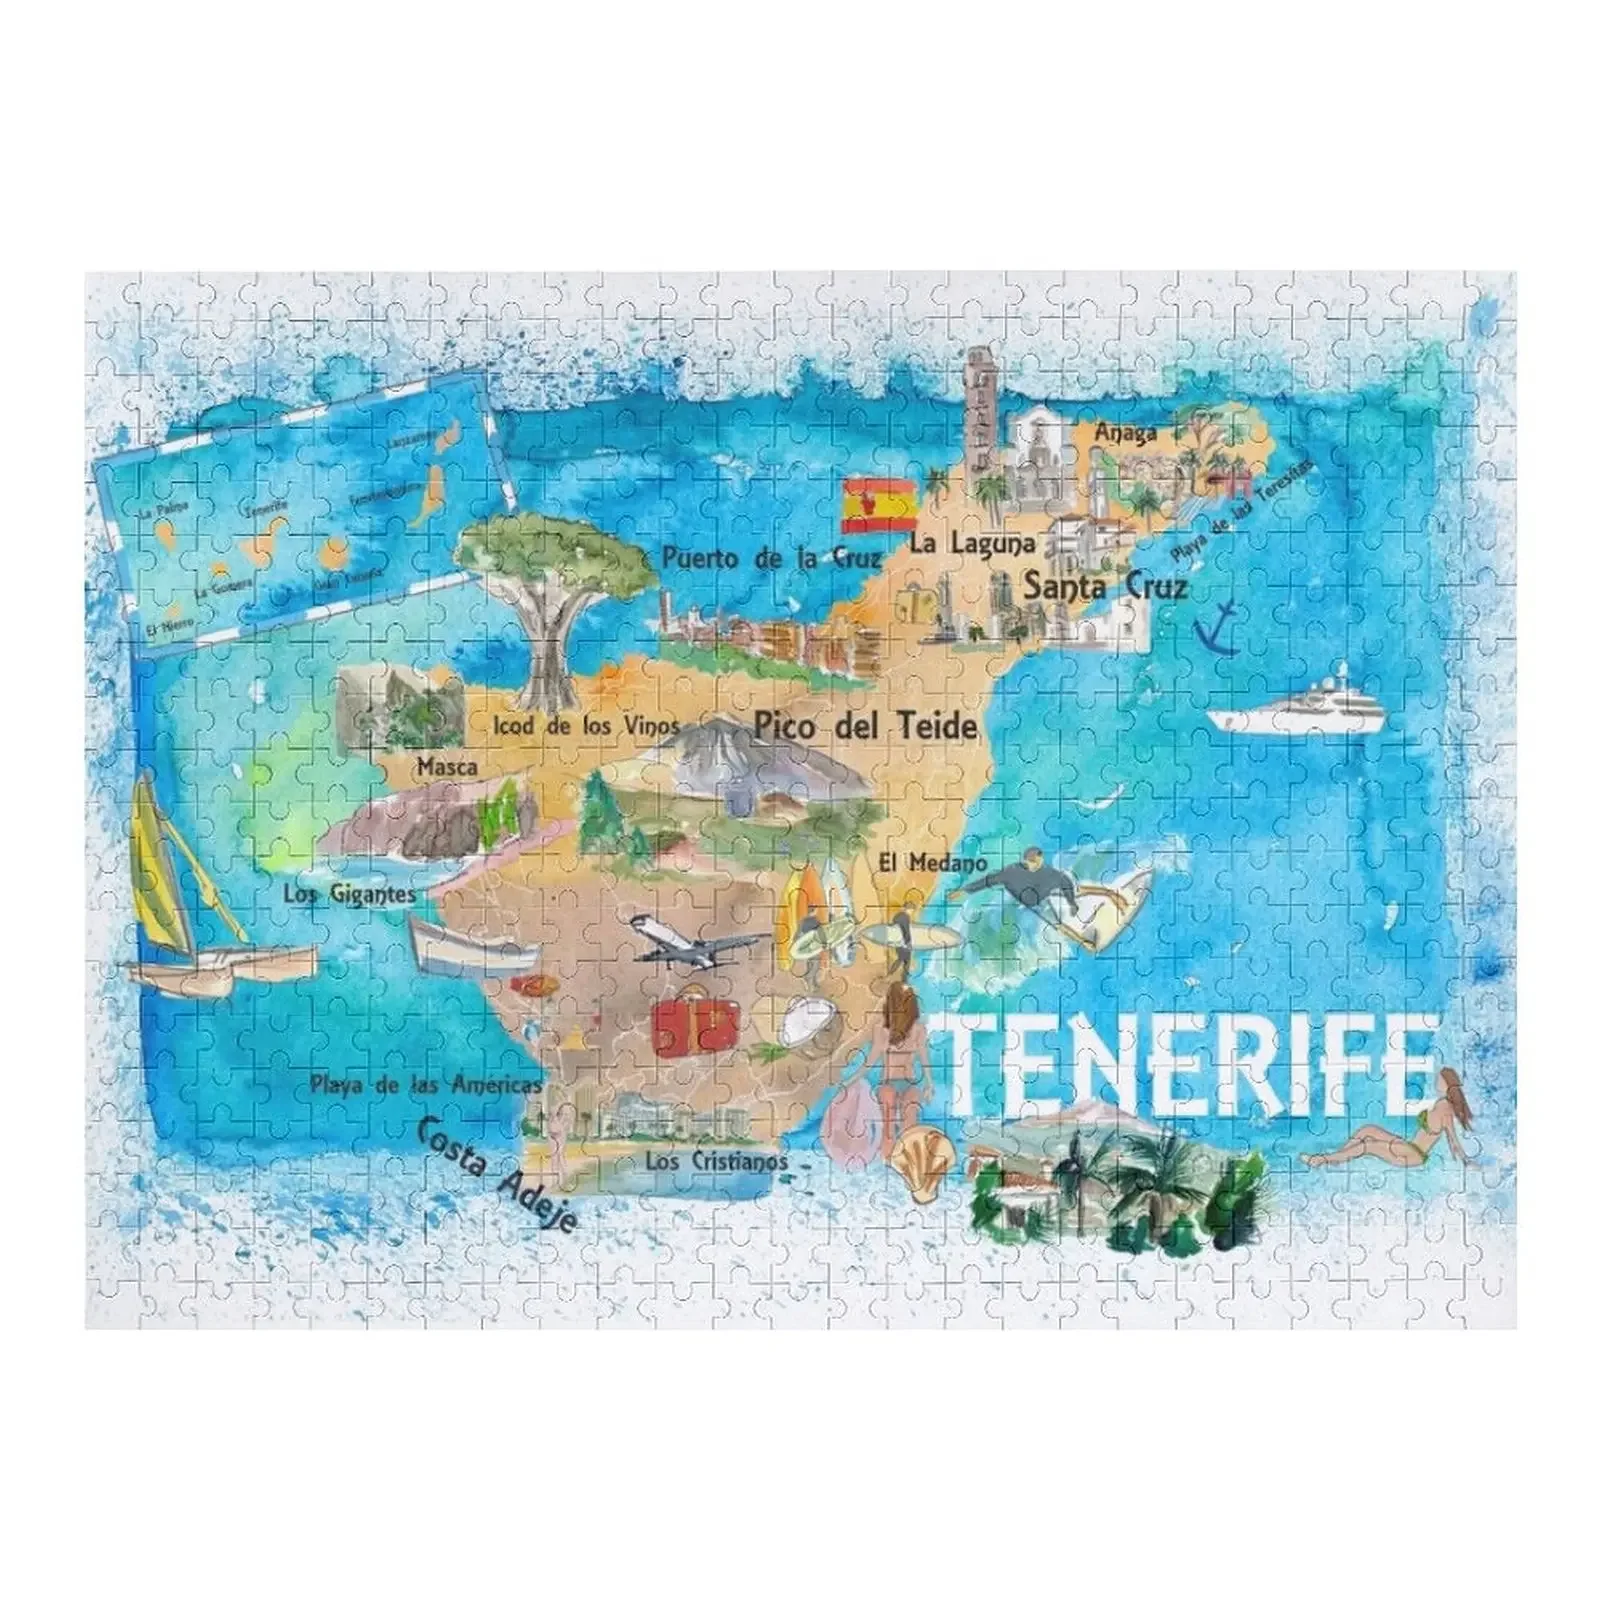 Tenerife Canarias Spain Illustrated Map with Landmarks and Highlights Jigsaw Puzzle Wooden Adults Personalized Name Puzzle name tag sticker in spain custom stickers with name waterproof personalized children school stationery waterbottle pencil label